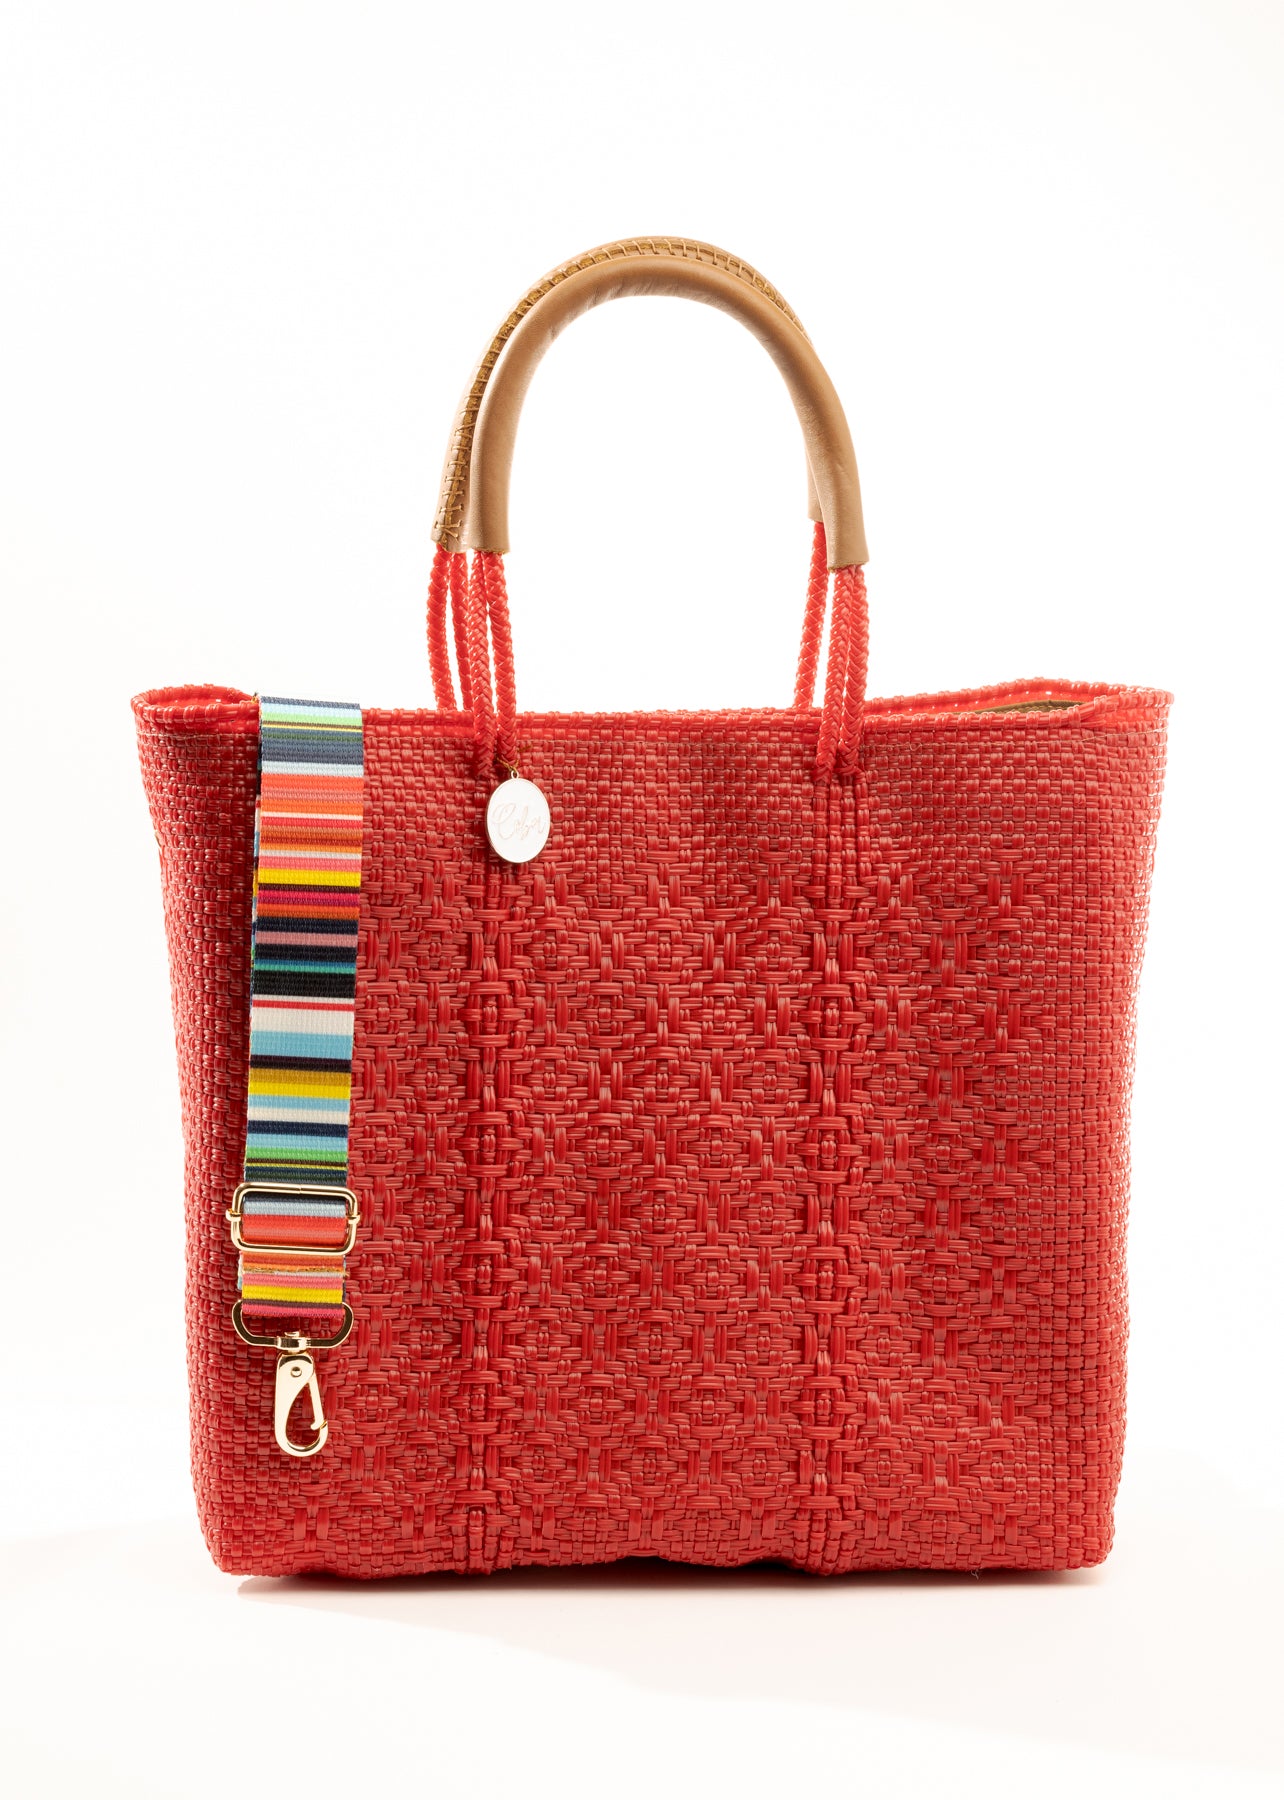 Rainbow striped purse strap hanging over red woven tote bag